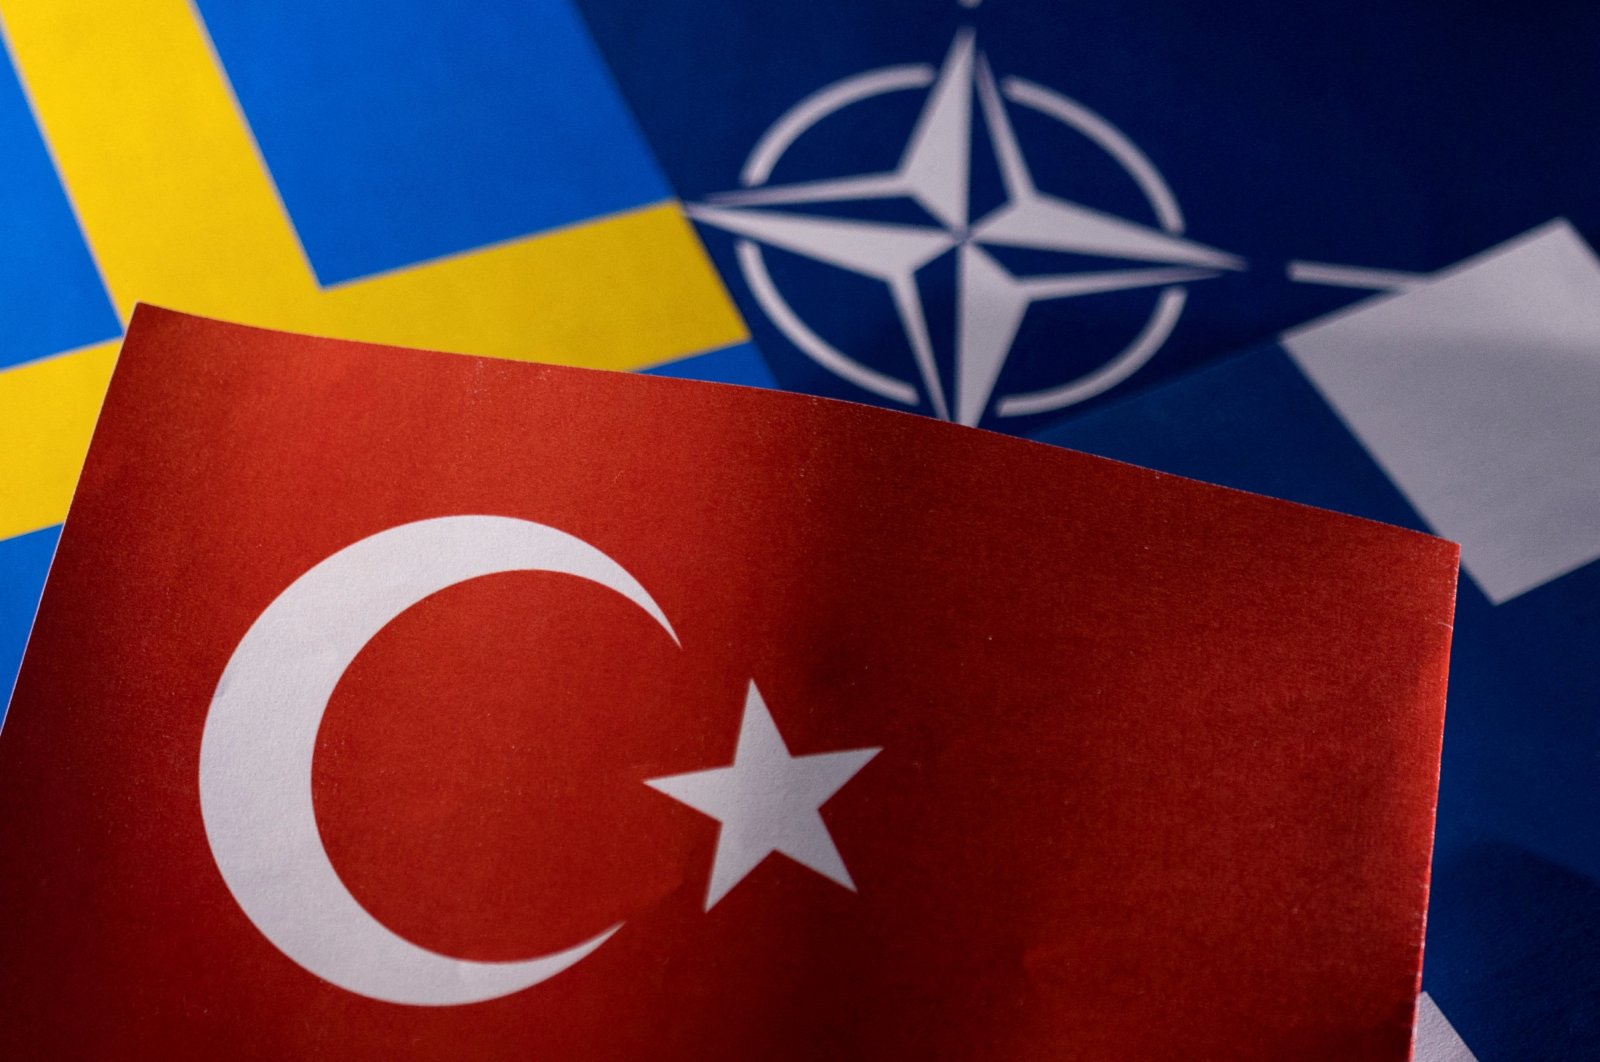 FILE PHOTO: NATO, Turkish, Swedish and Finnish flags are seen in this illustration taken May 18, 2022. REUTERS/Dado Ruvic/Illustration/File Photo